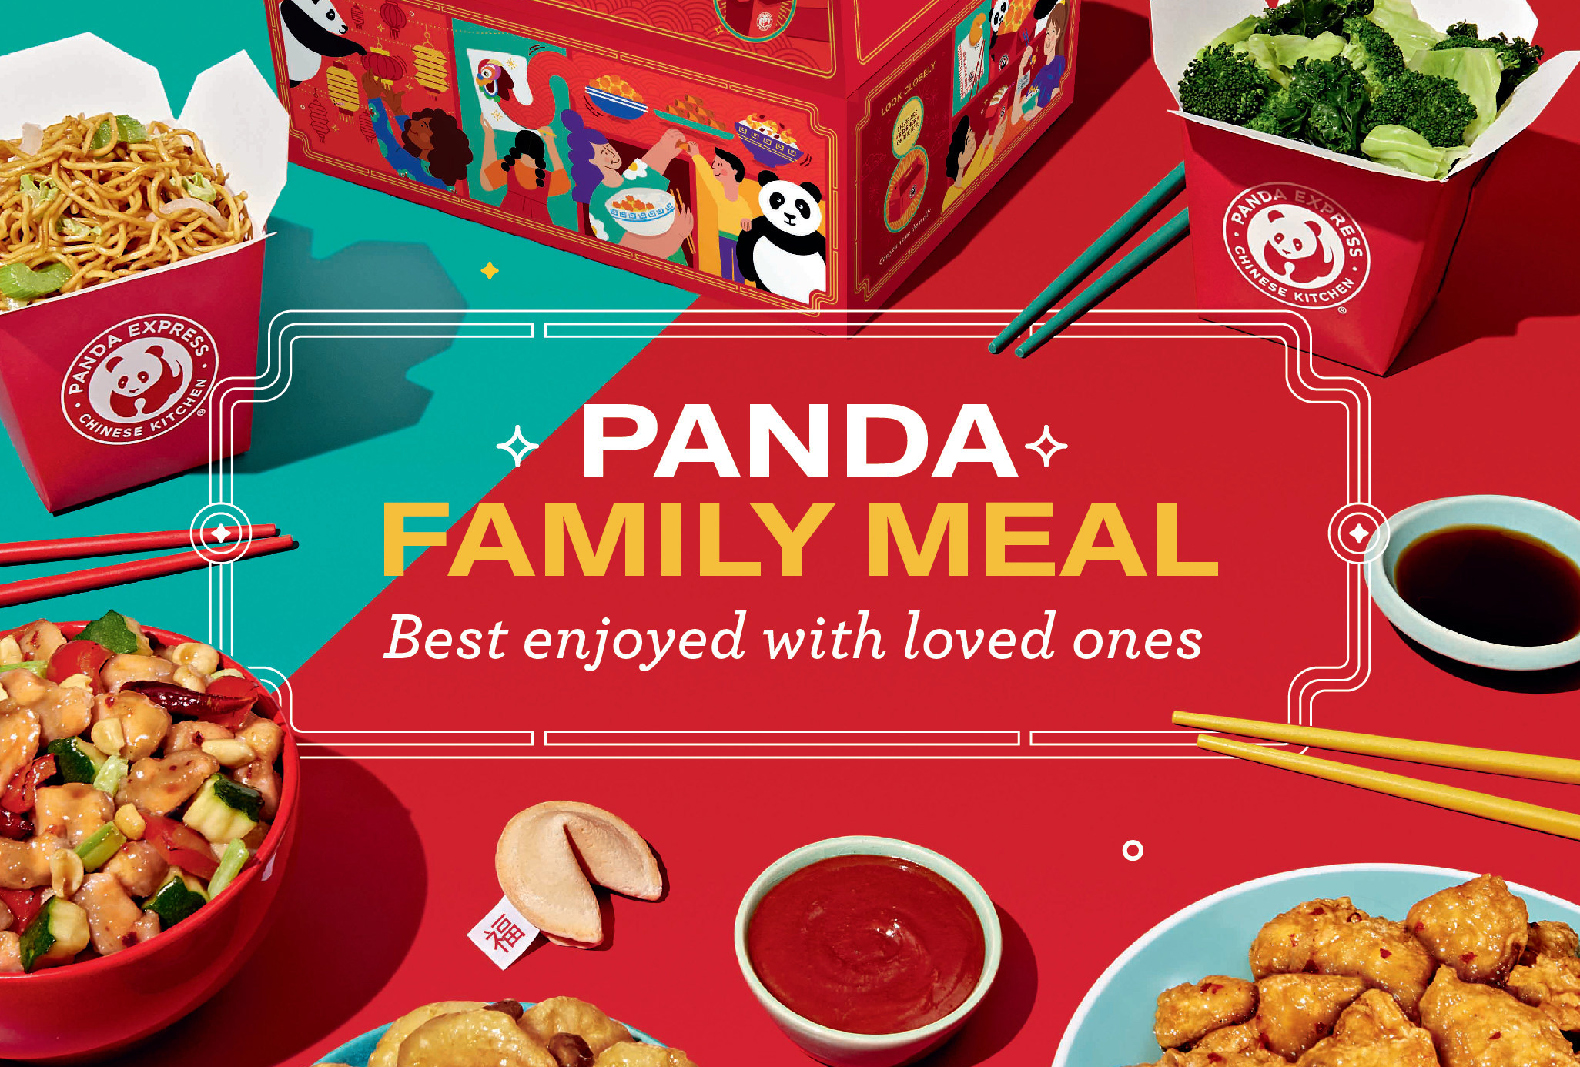 Panda Express launches new online gaming experience Nation's